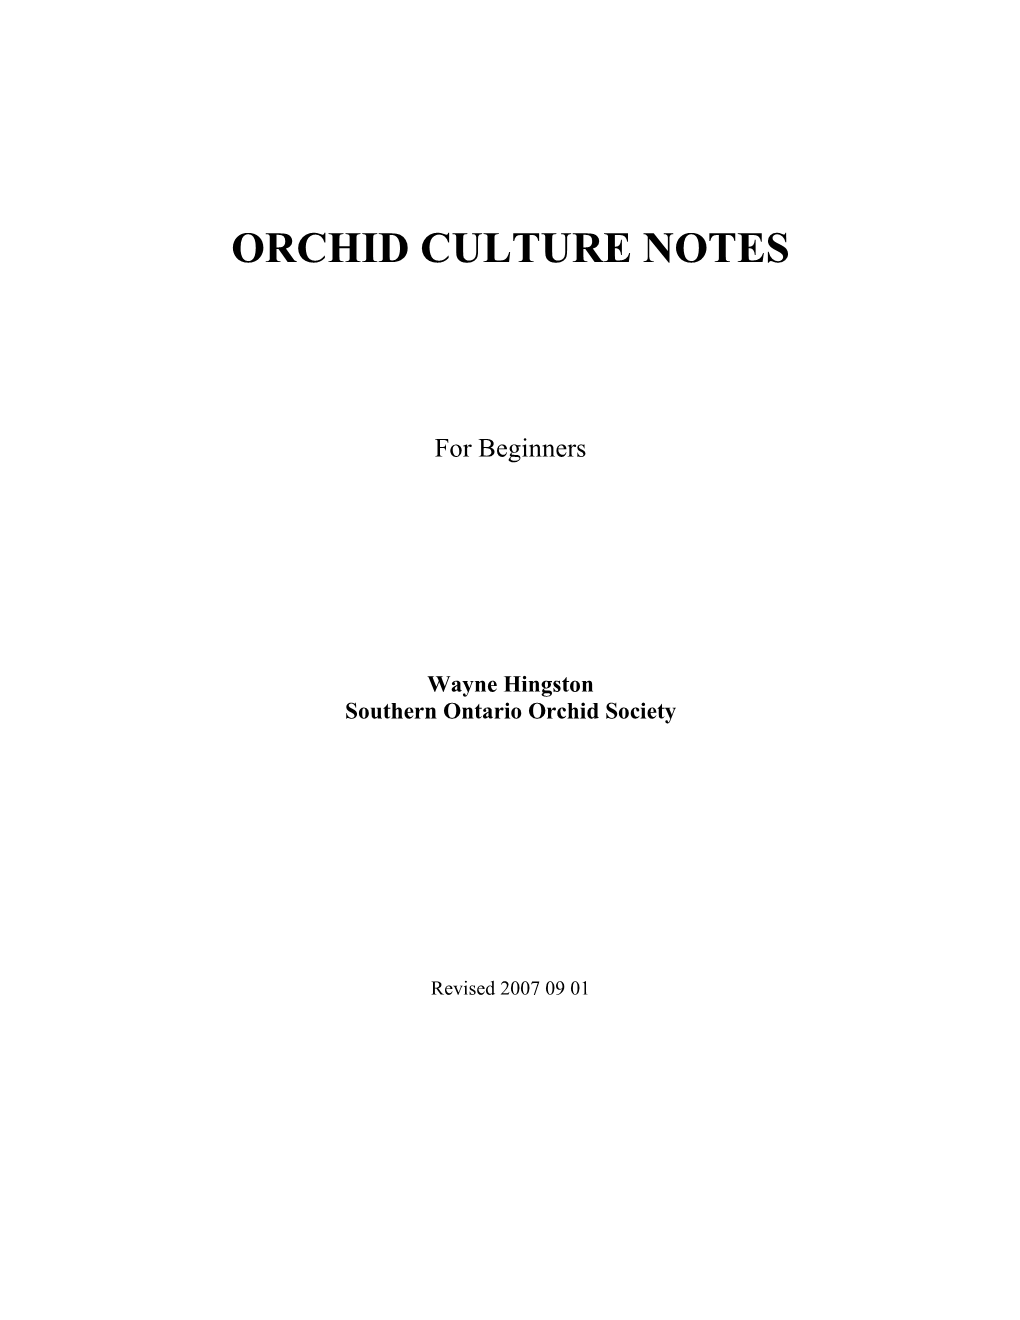 Orchid Culture Notes for Beginners